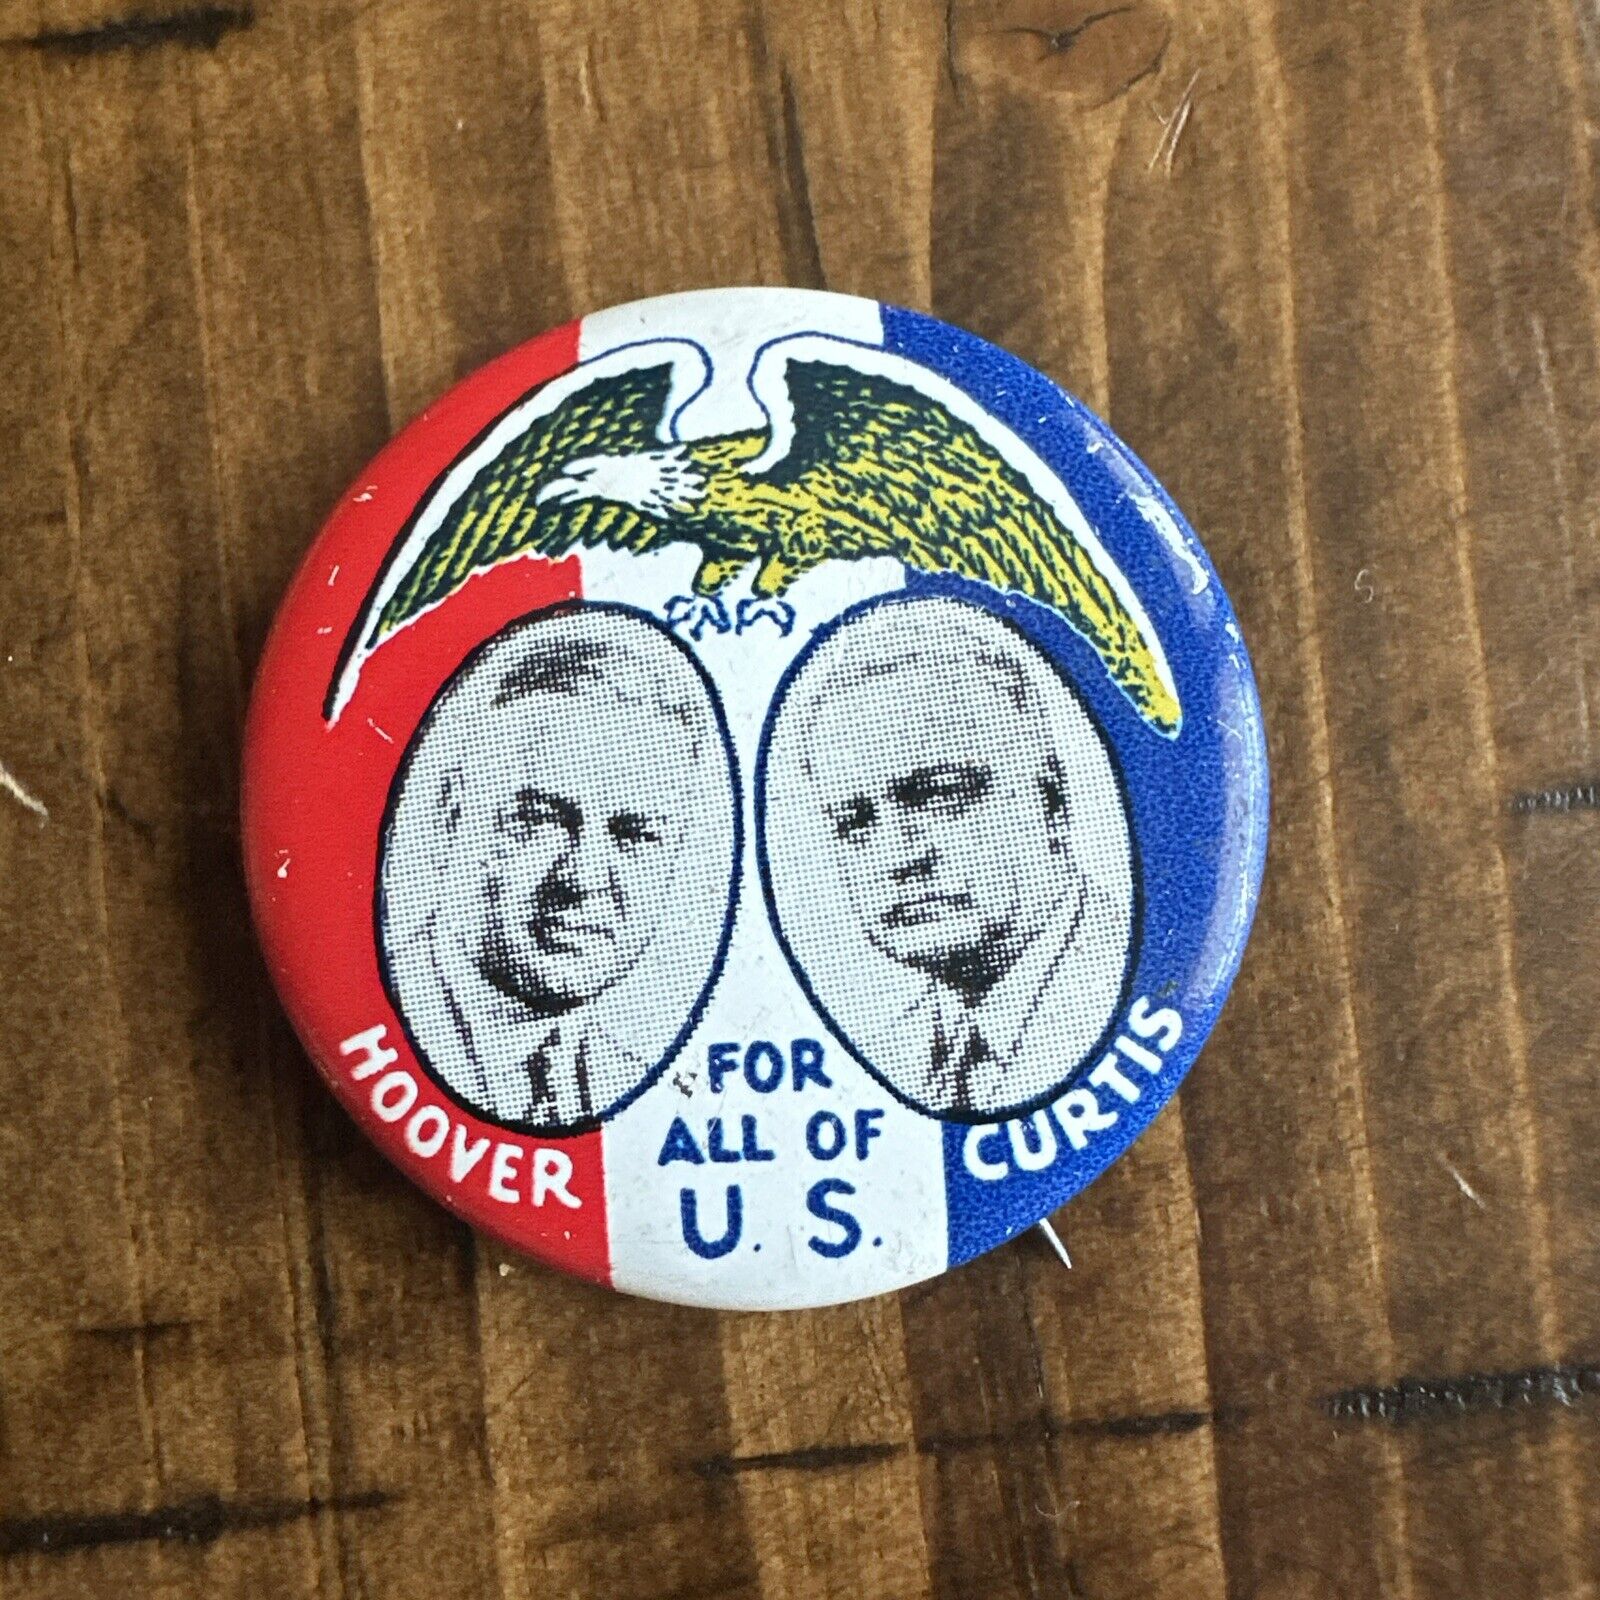 Hoover Curtis For All Of U.S. Pin. 1980 Remake Of The 1932 Presidential Election